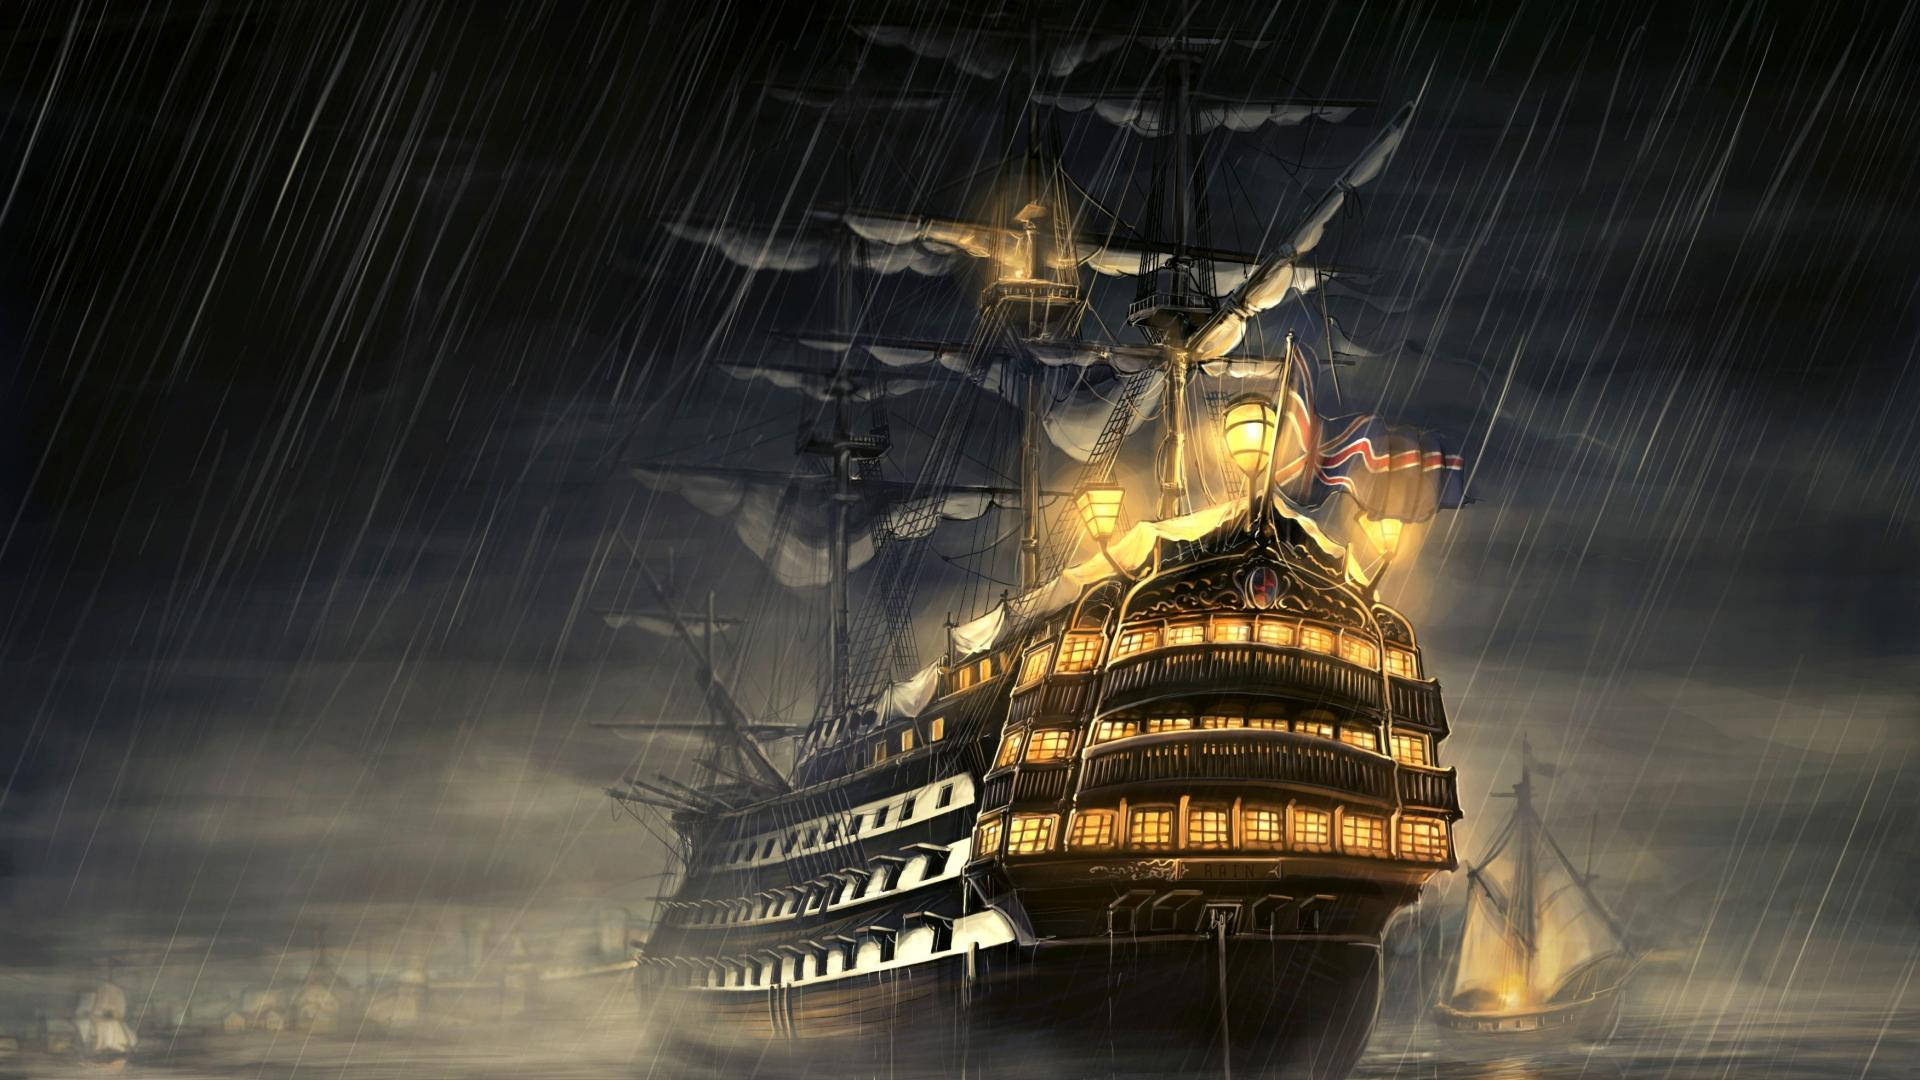 A large ship is sailing in the rain - Pirate